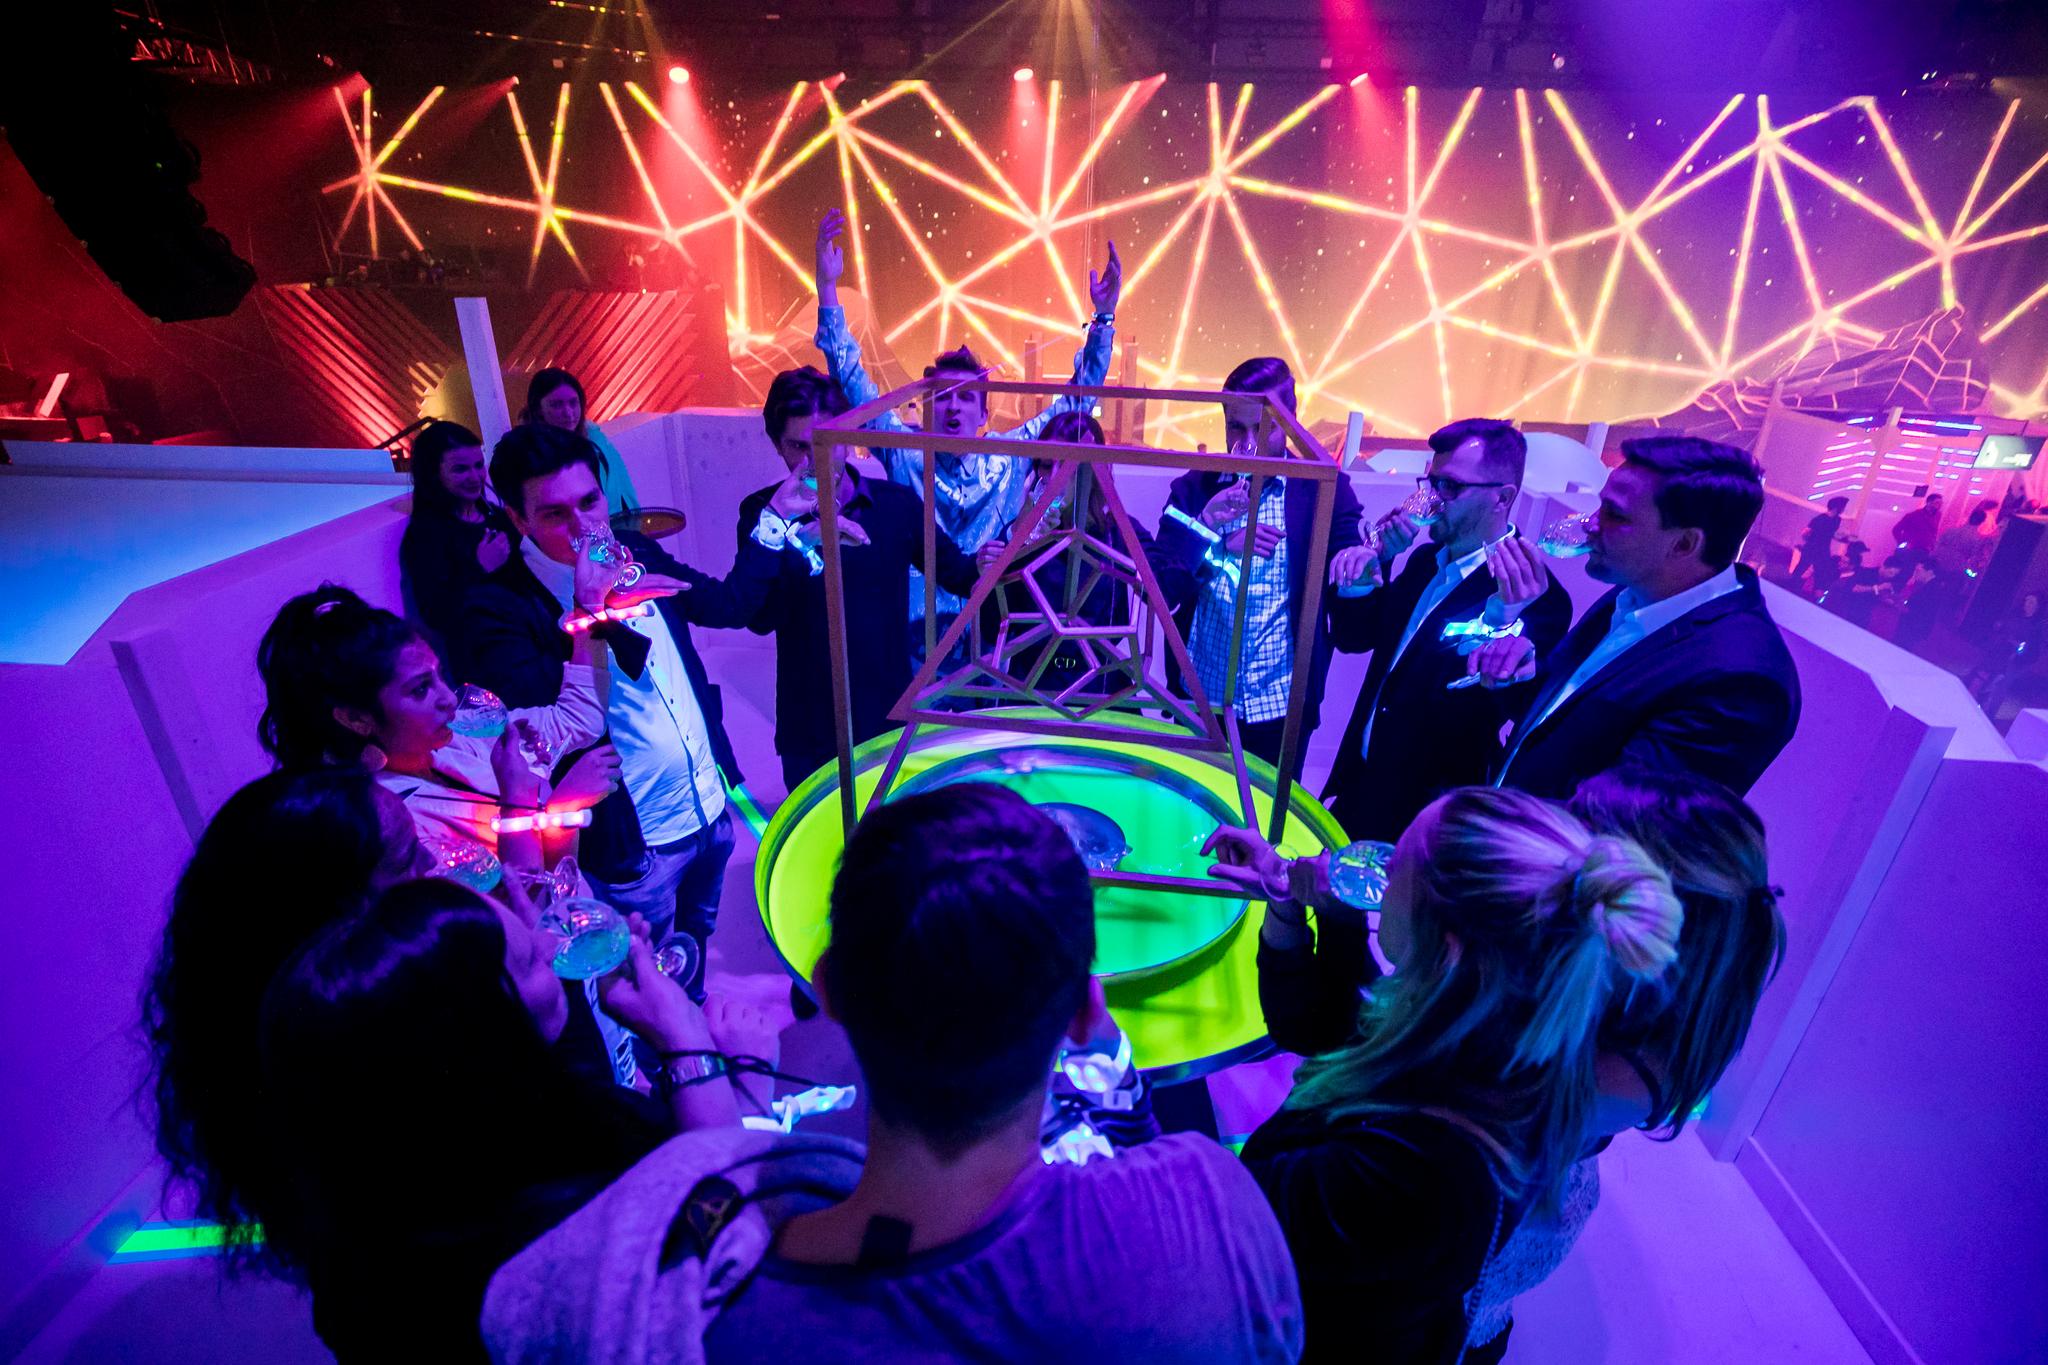 Friends around a table with a geometric sculpture in the center have drinks in a club environment.